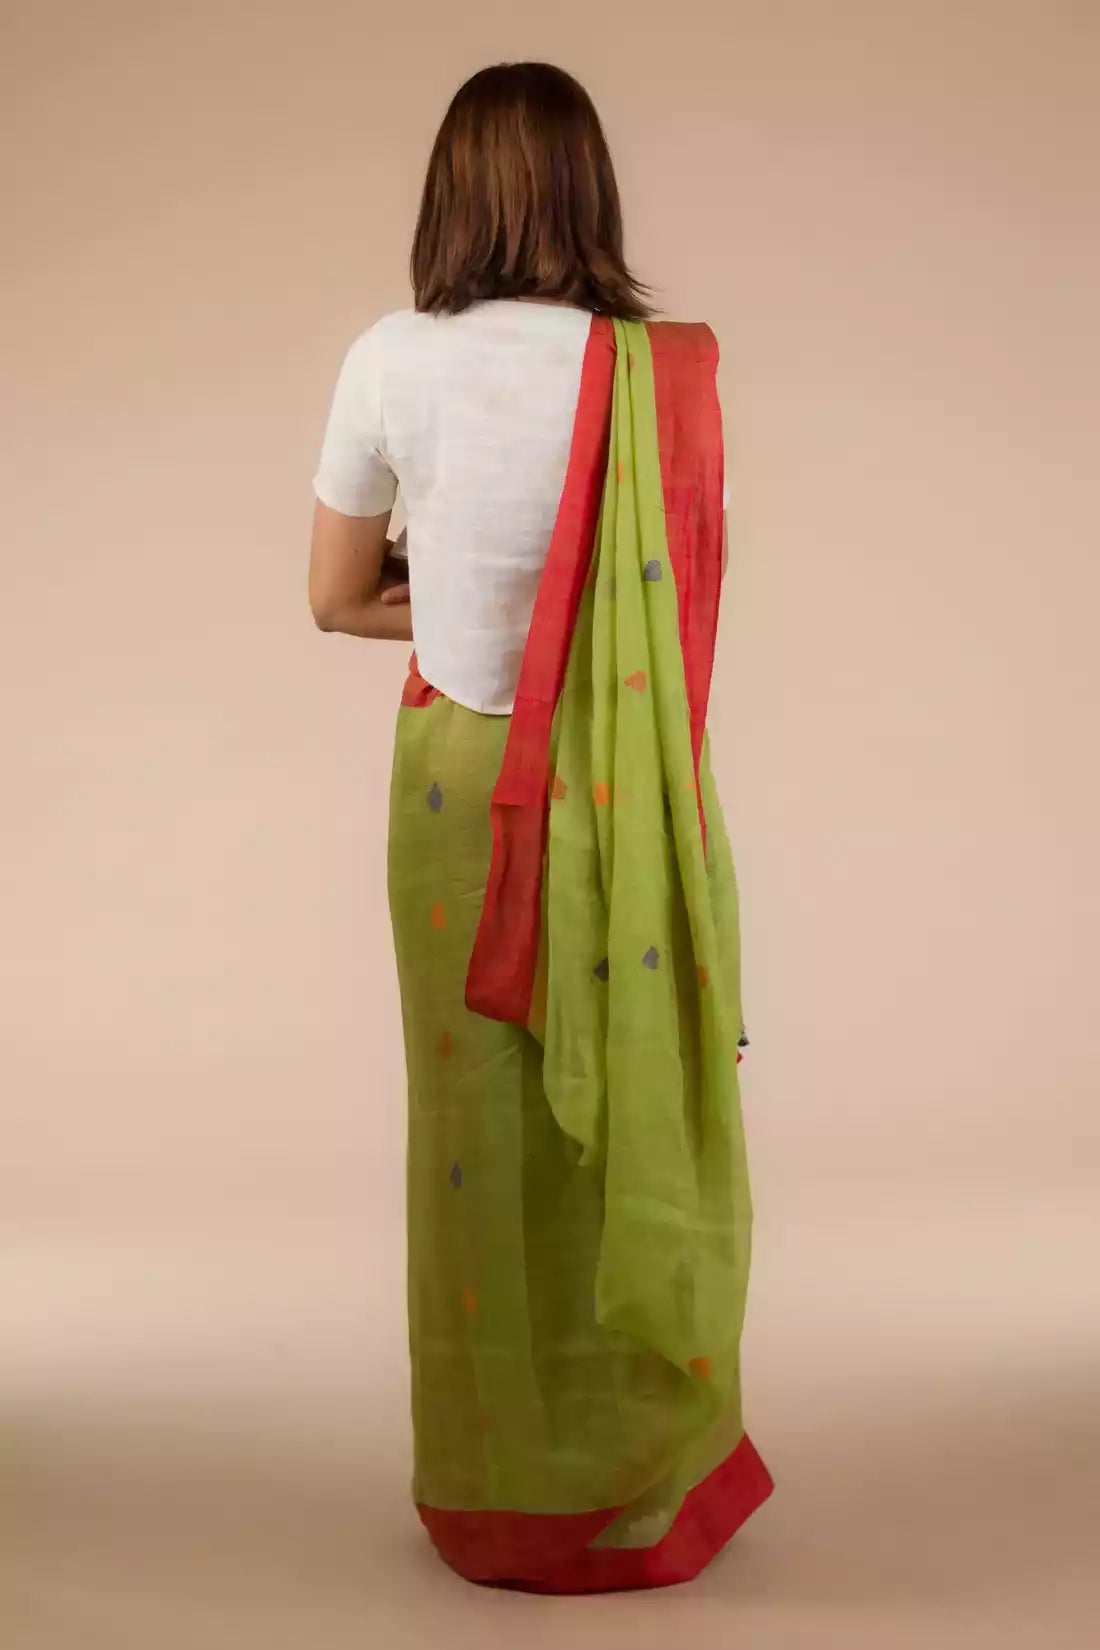 This is view from back of the Parrot Green Jamdani Pure Linen Saree, formal office wear for women